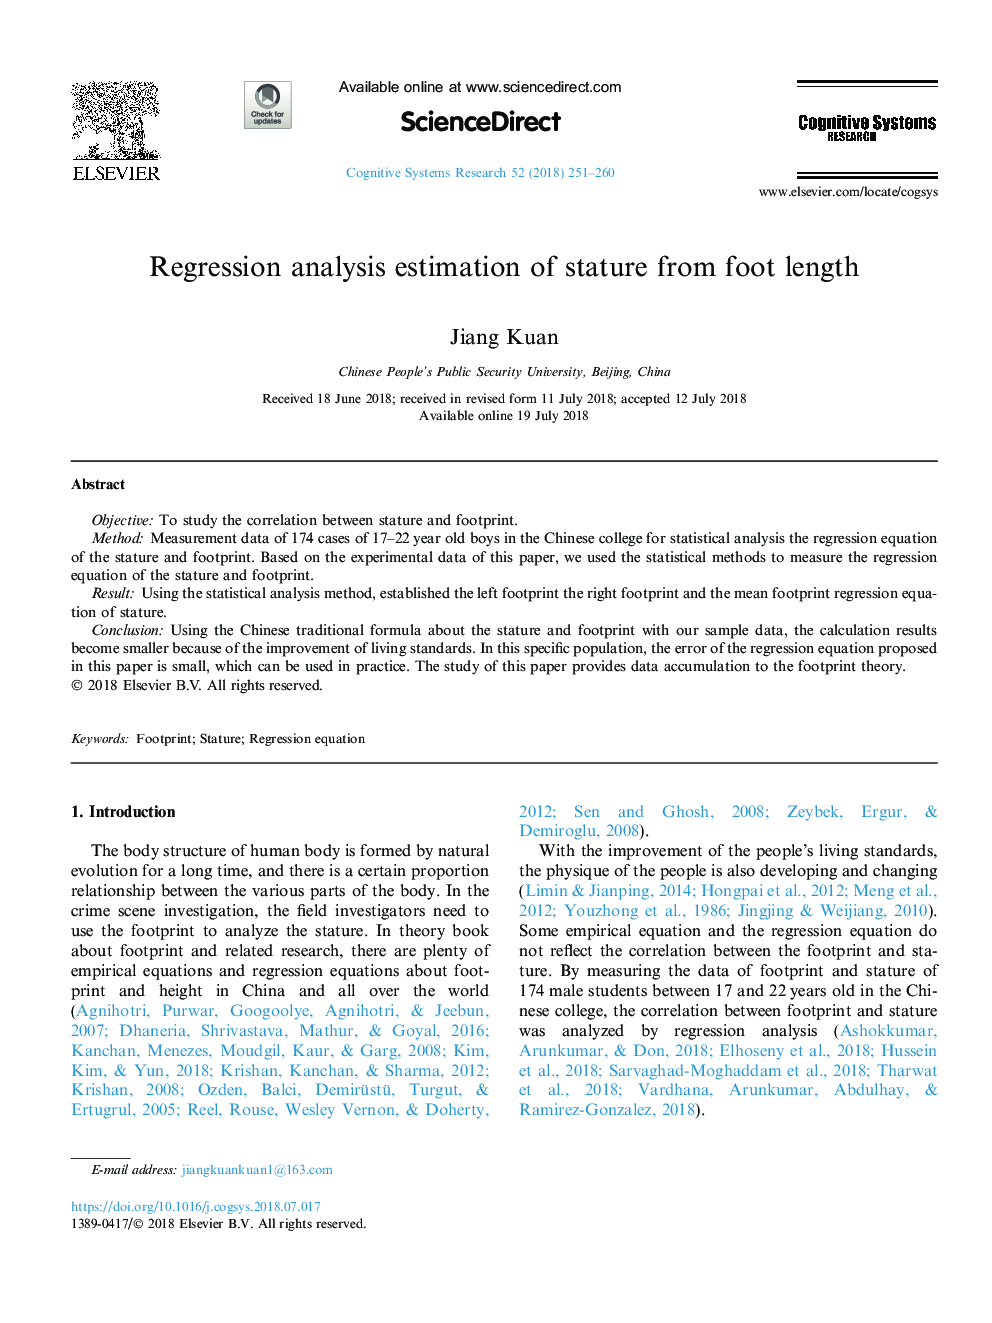 Regression analysis estimation of stature from foot length